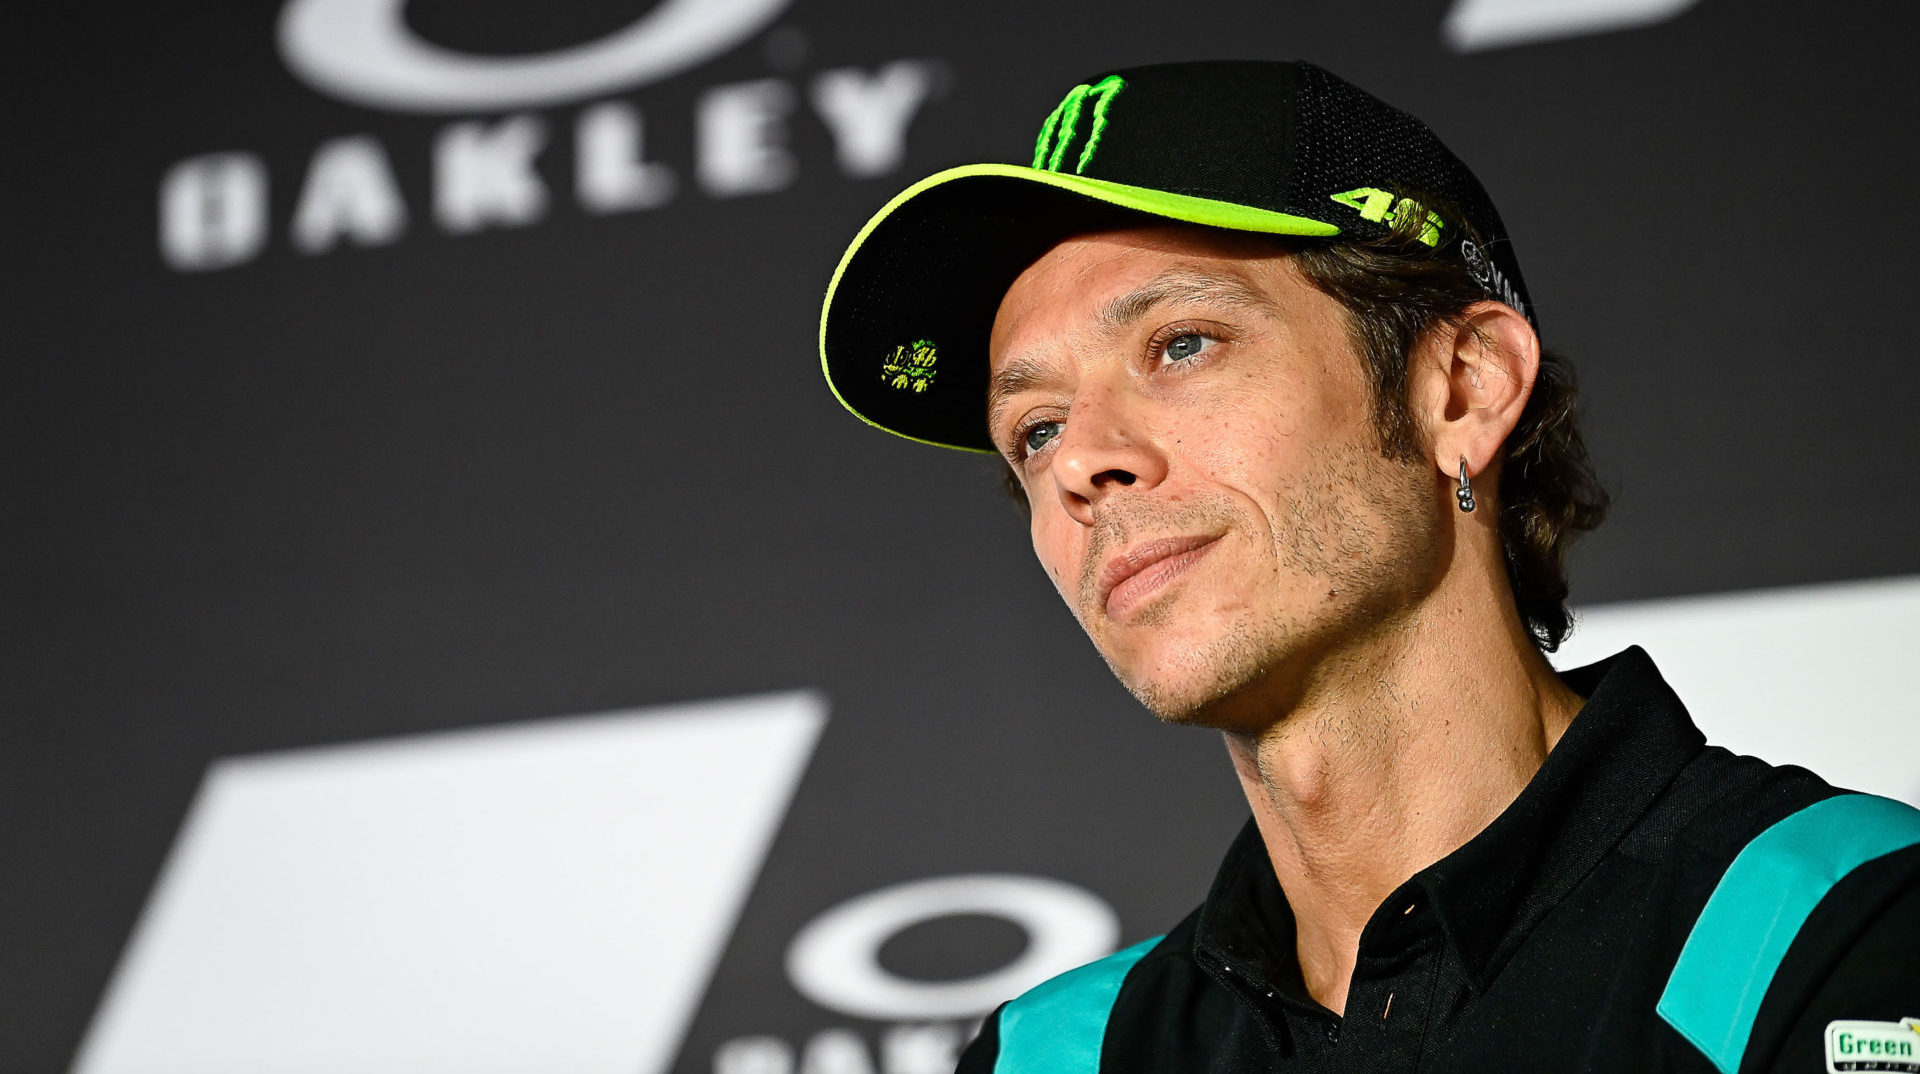 Valentino Rossi, Revised and Updated: Life of a Legend